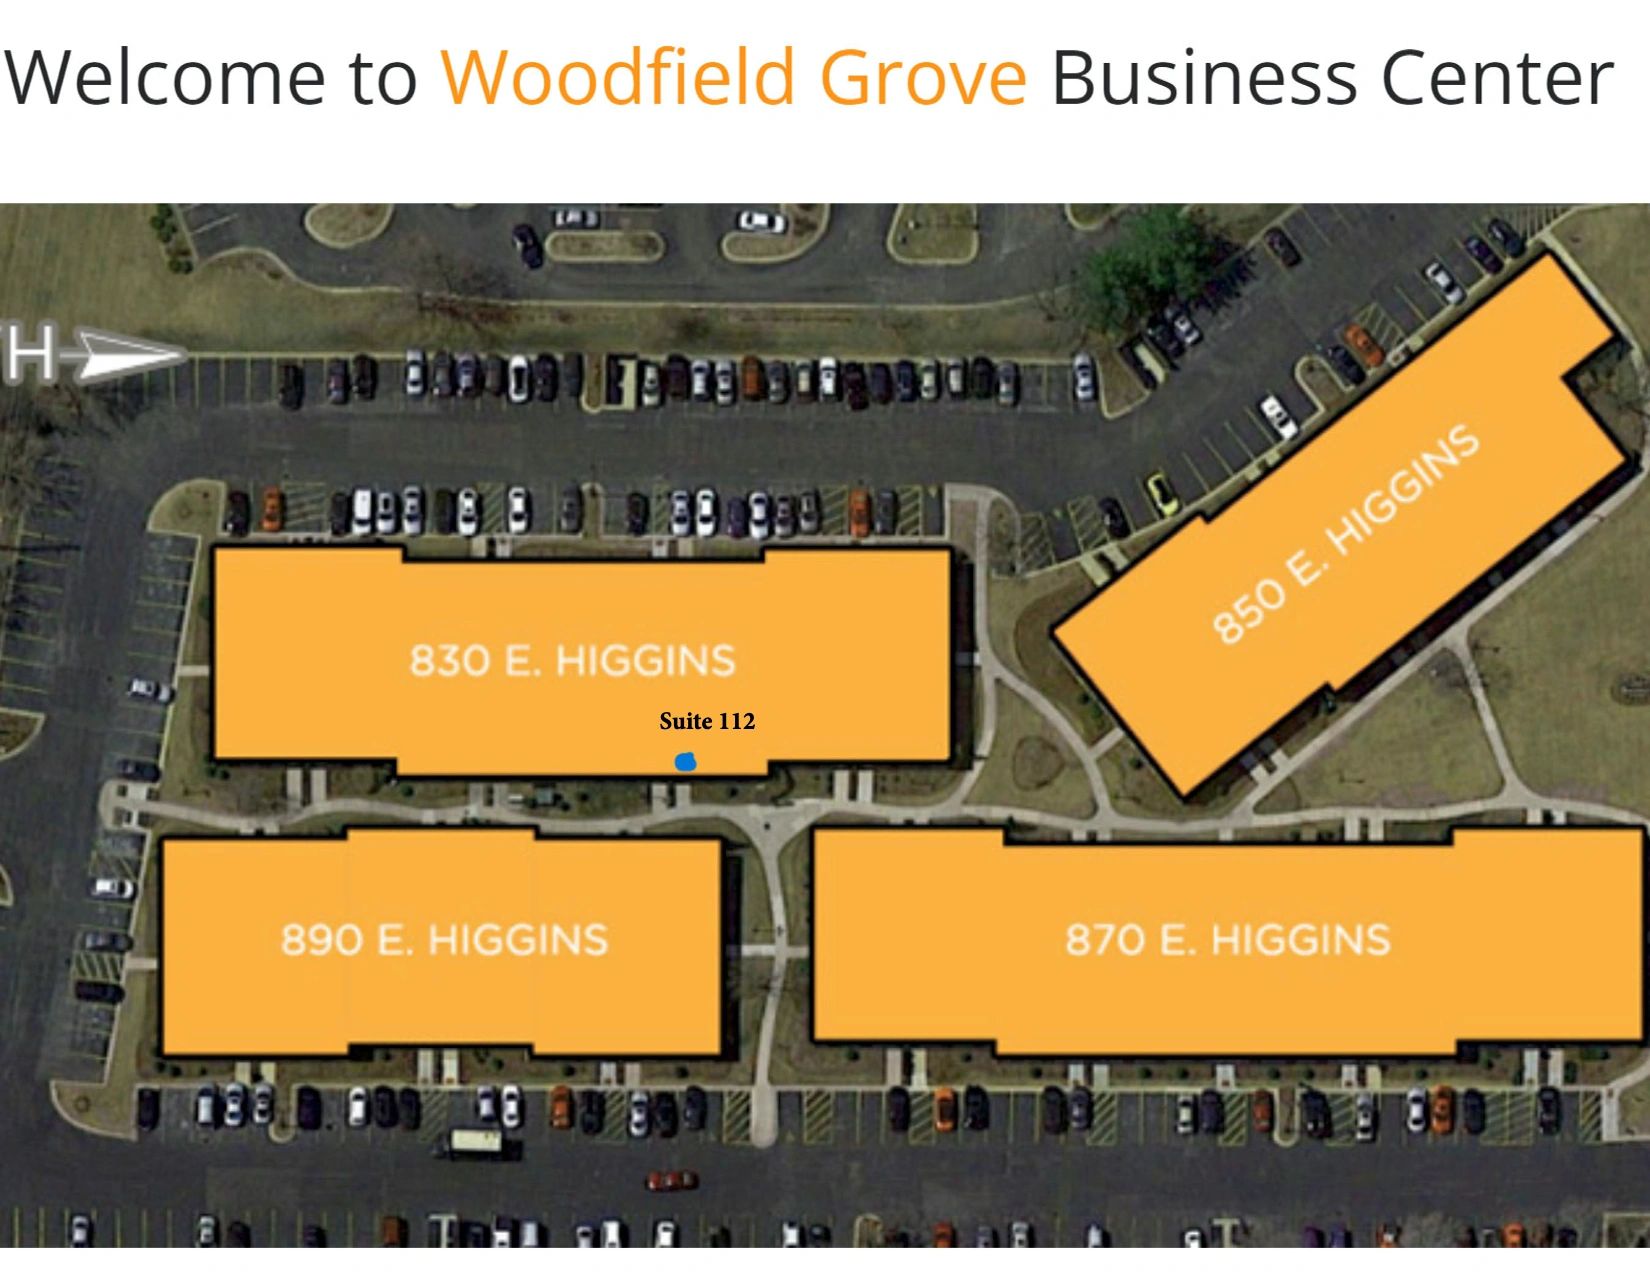 Woodfield grove business center